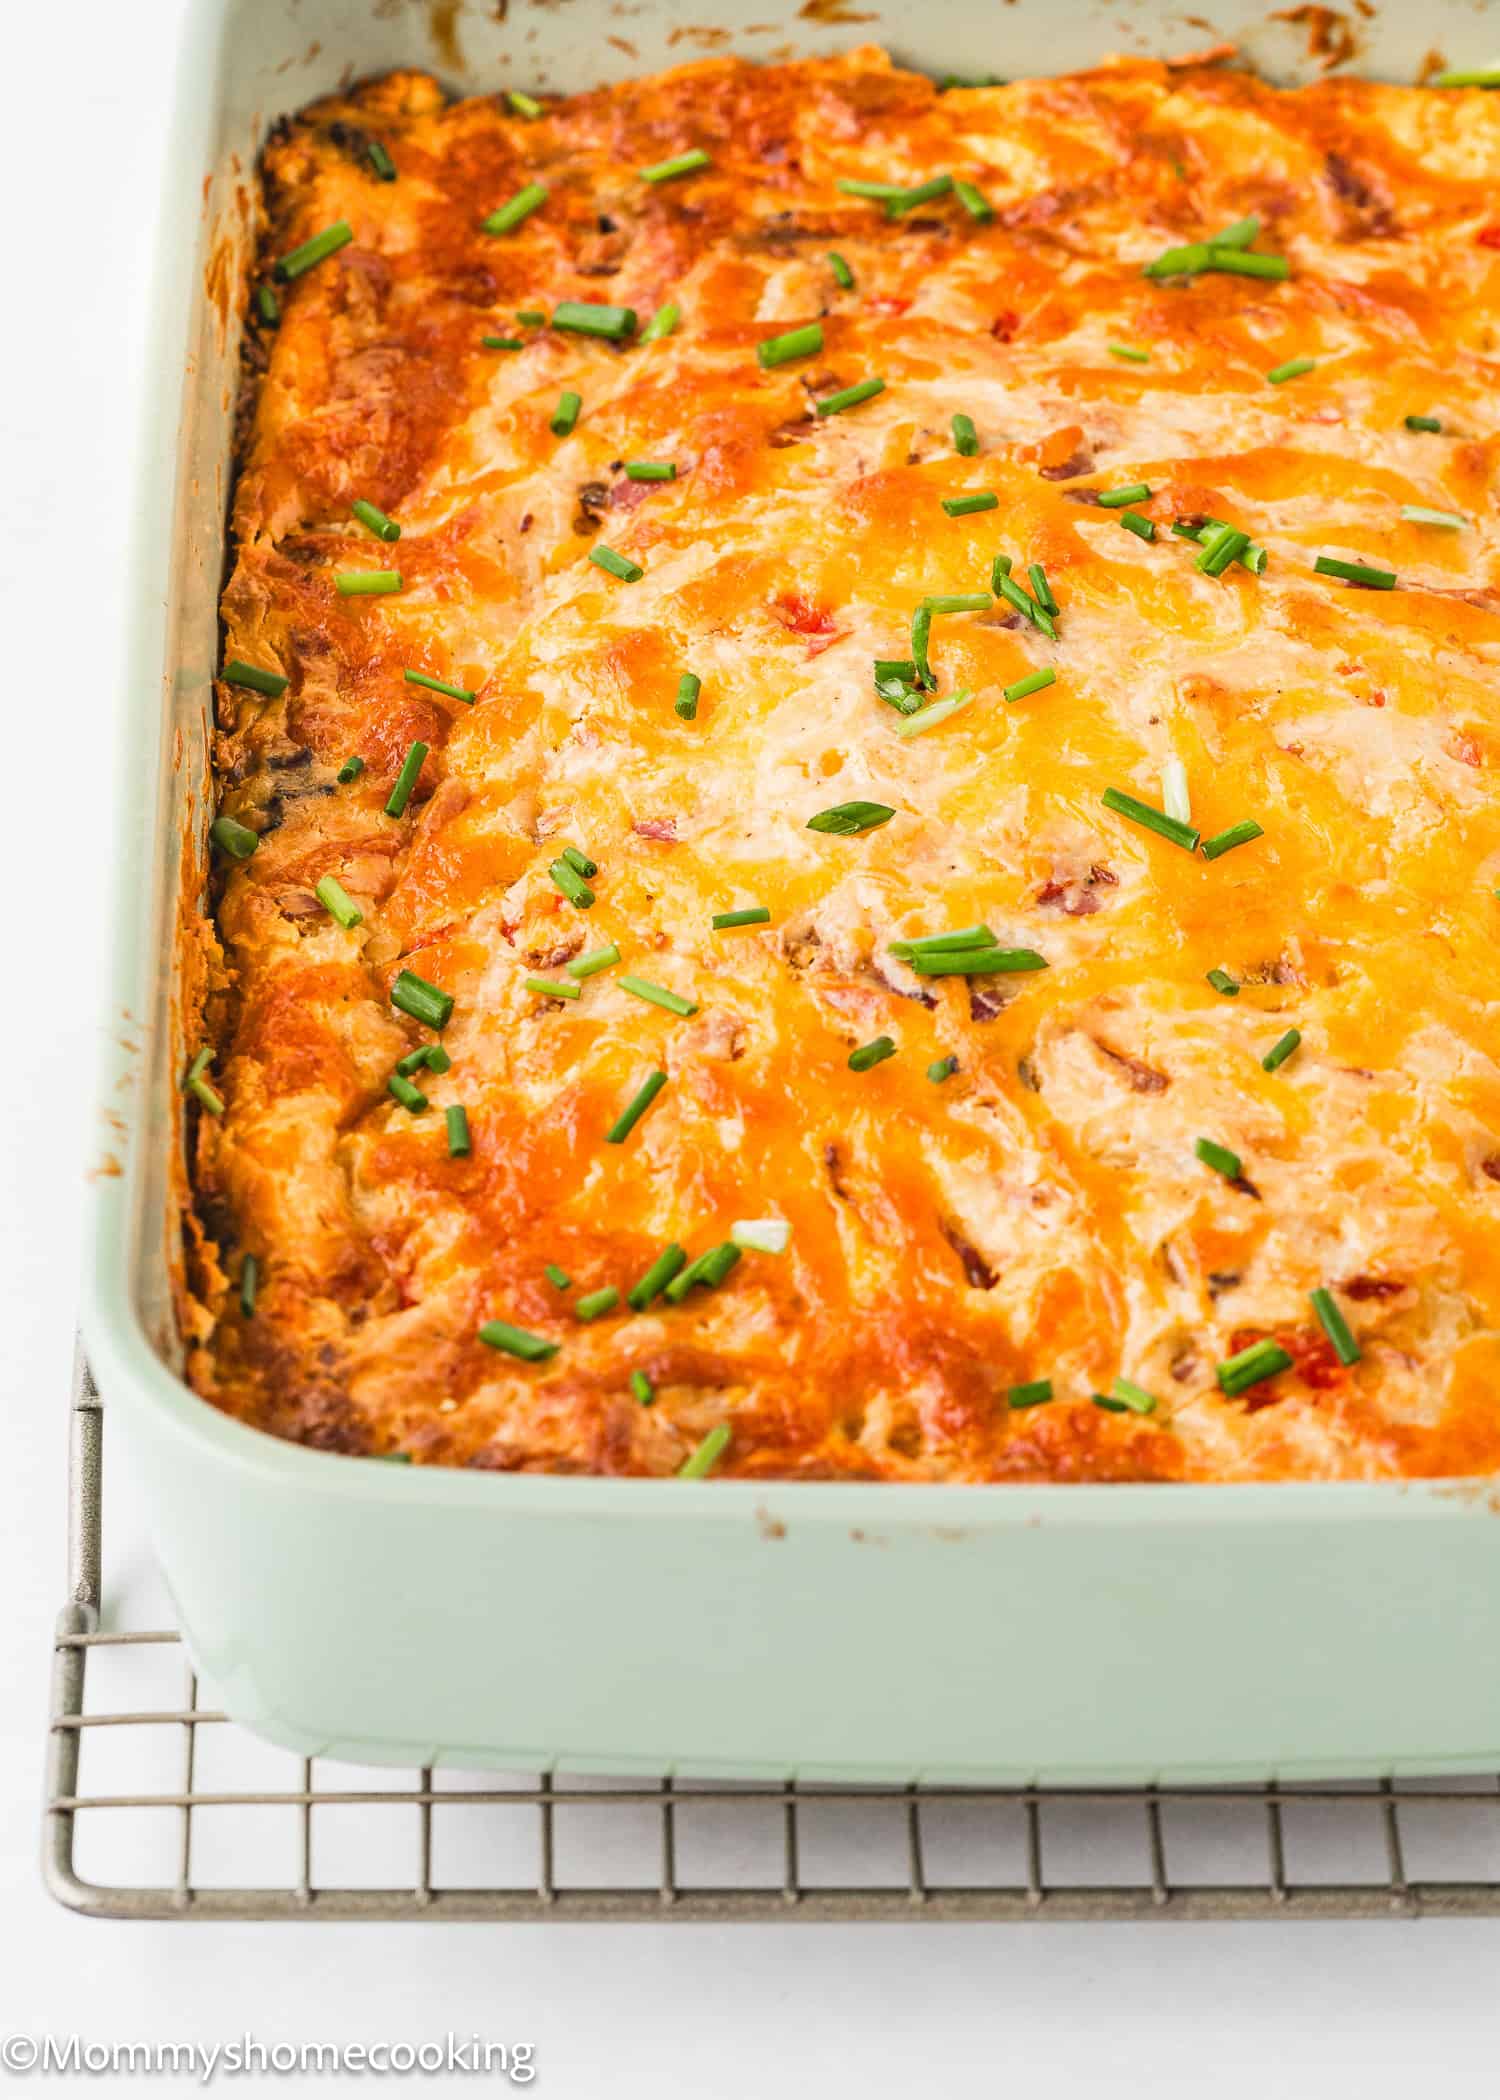 Baked Breakfast Casserole Without Eggs on a cooling rack.